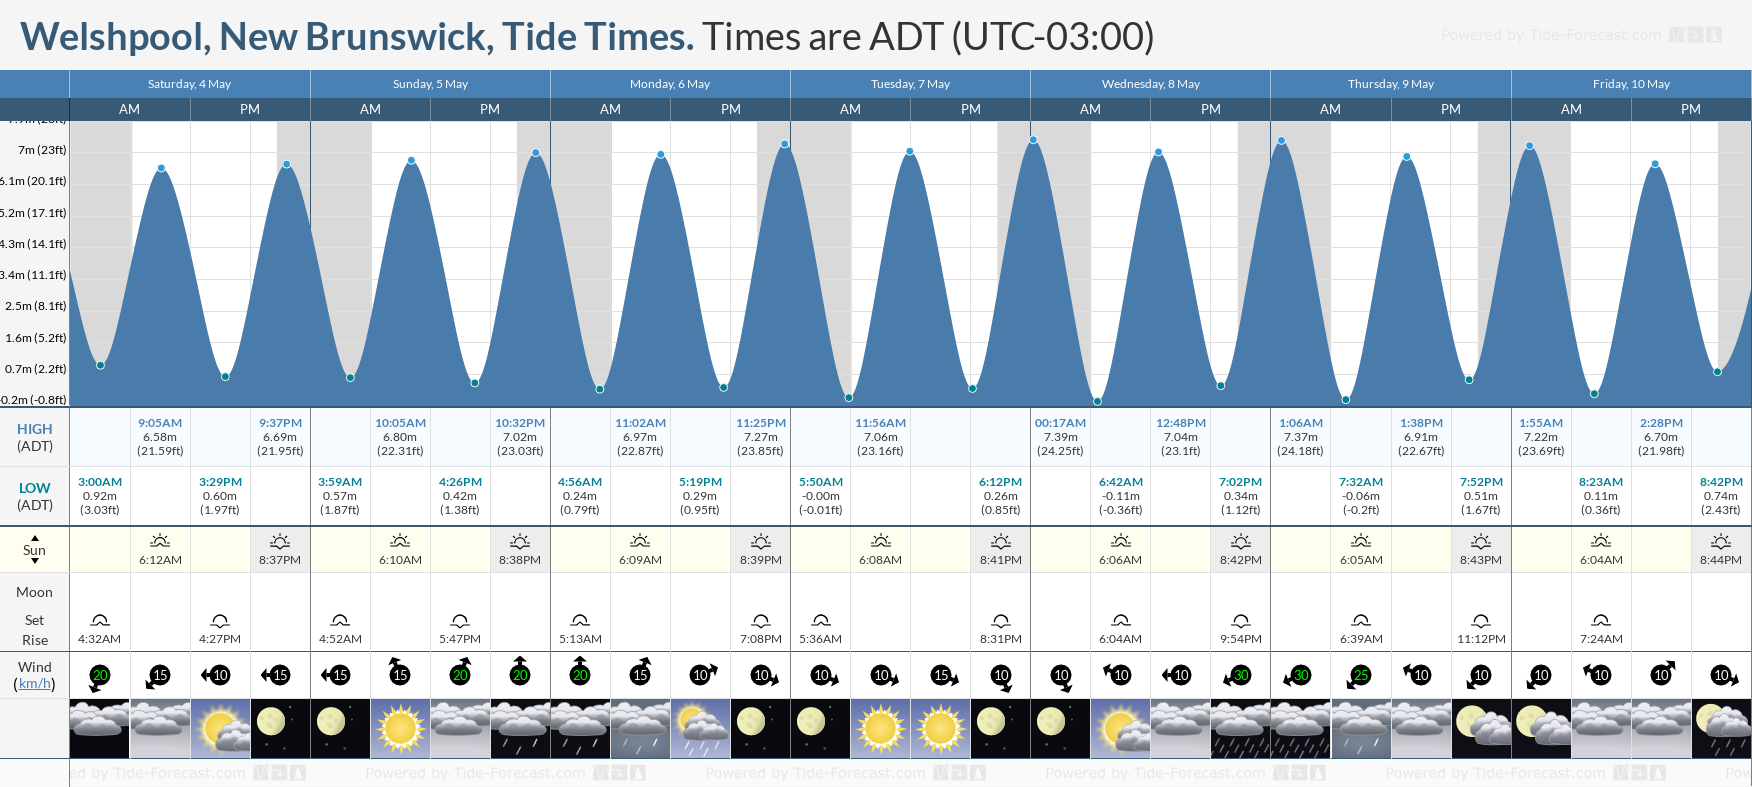 Welshpool, New Brunswick Tide Chart including high and low tide tide times for the next 7 days